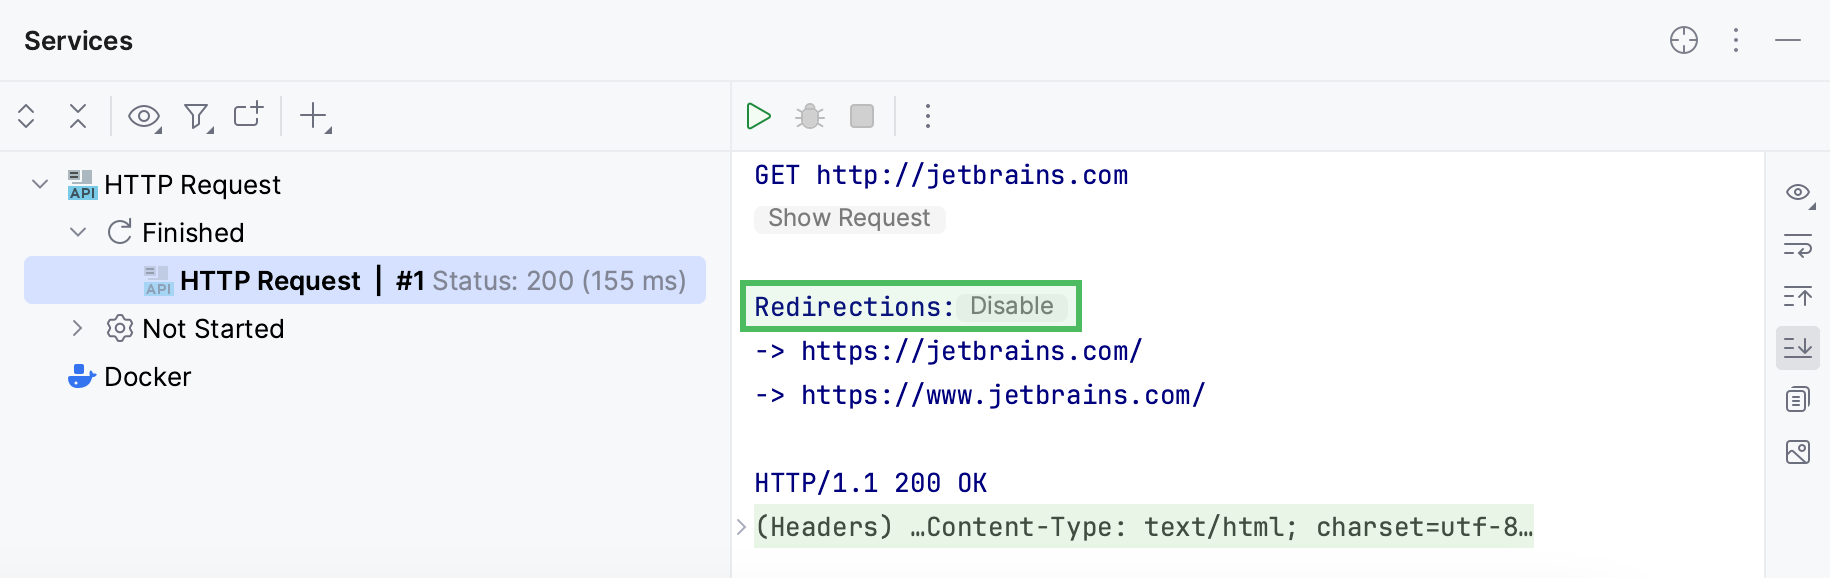 HTTP response with redirections